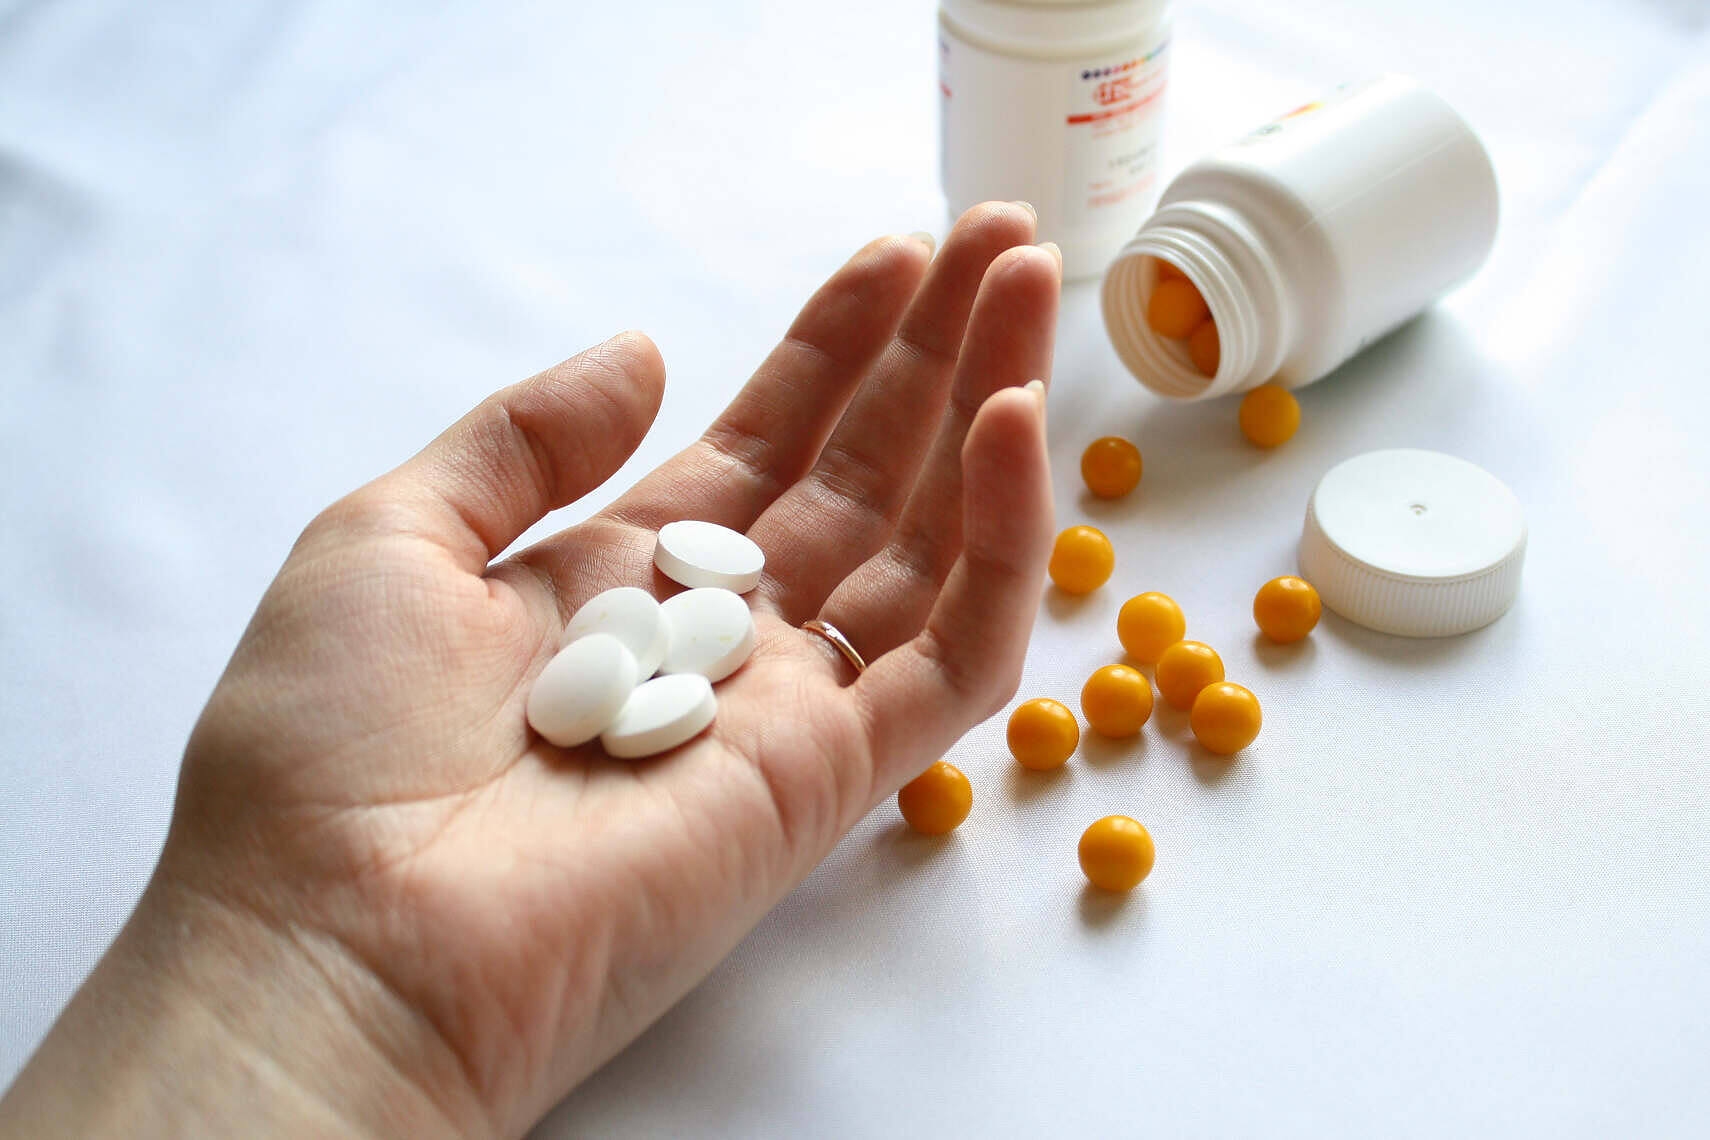 Hand holding white pills with orange pills and medication bottles in background for addiction treatment